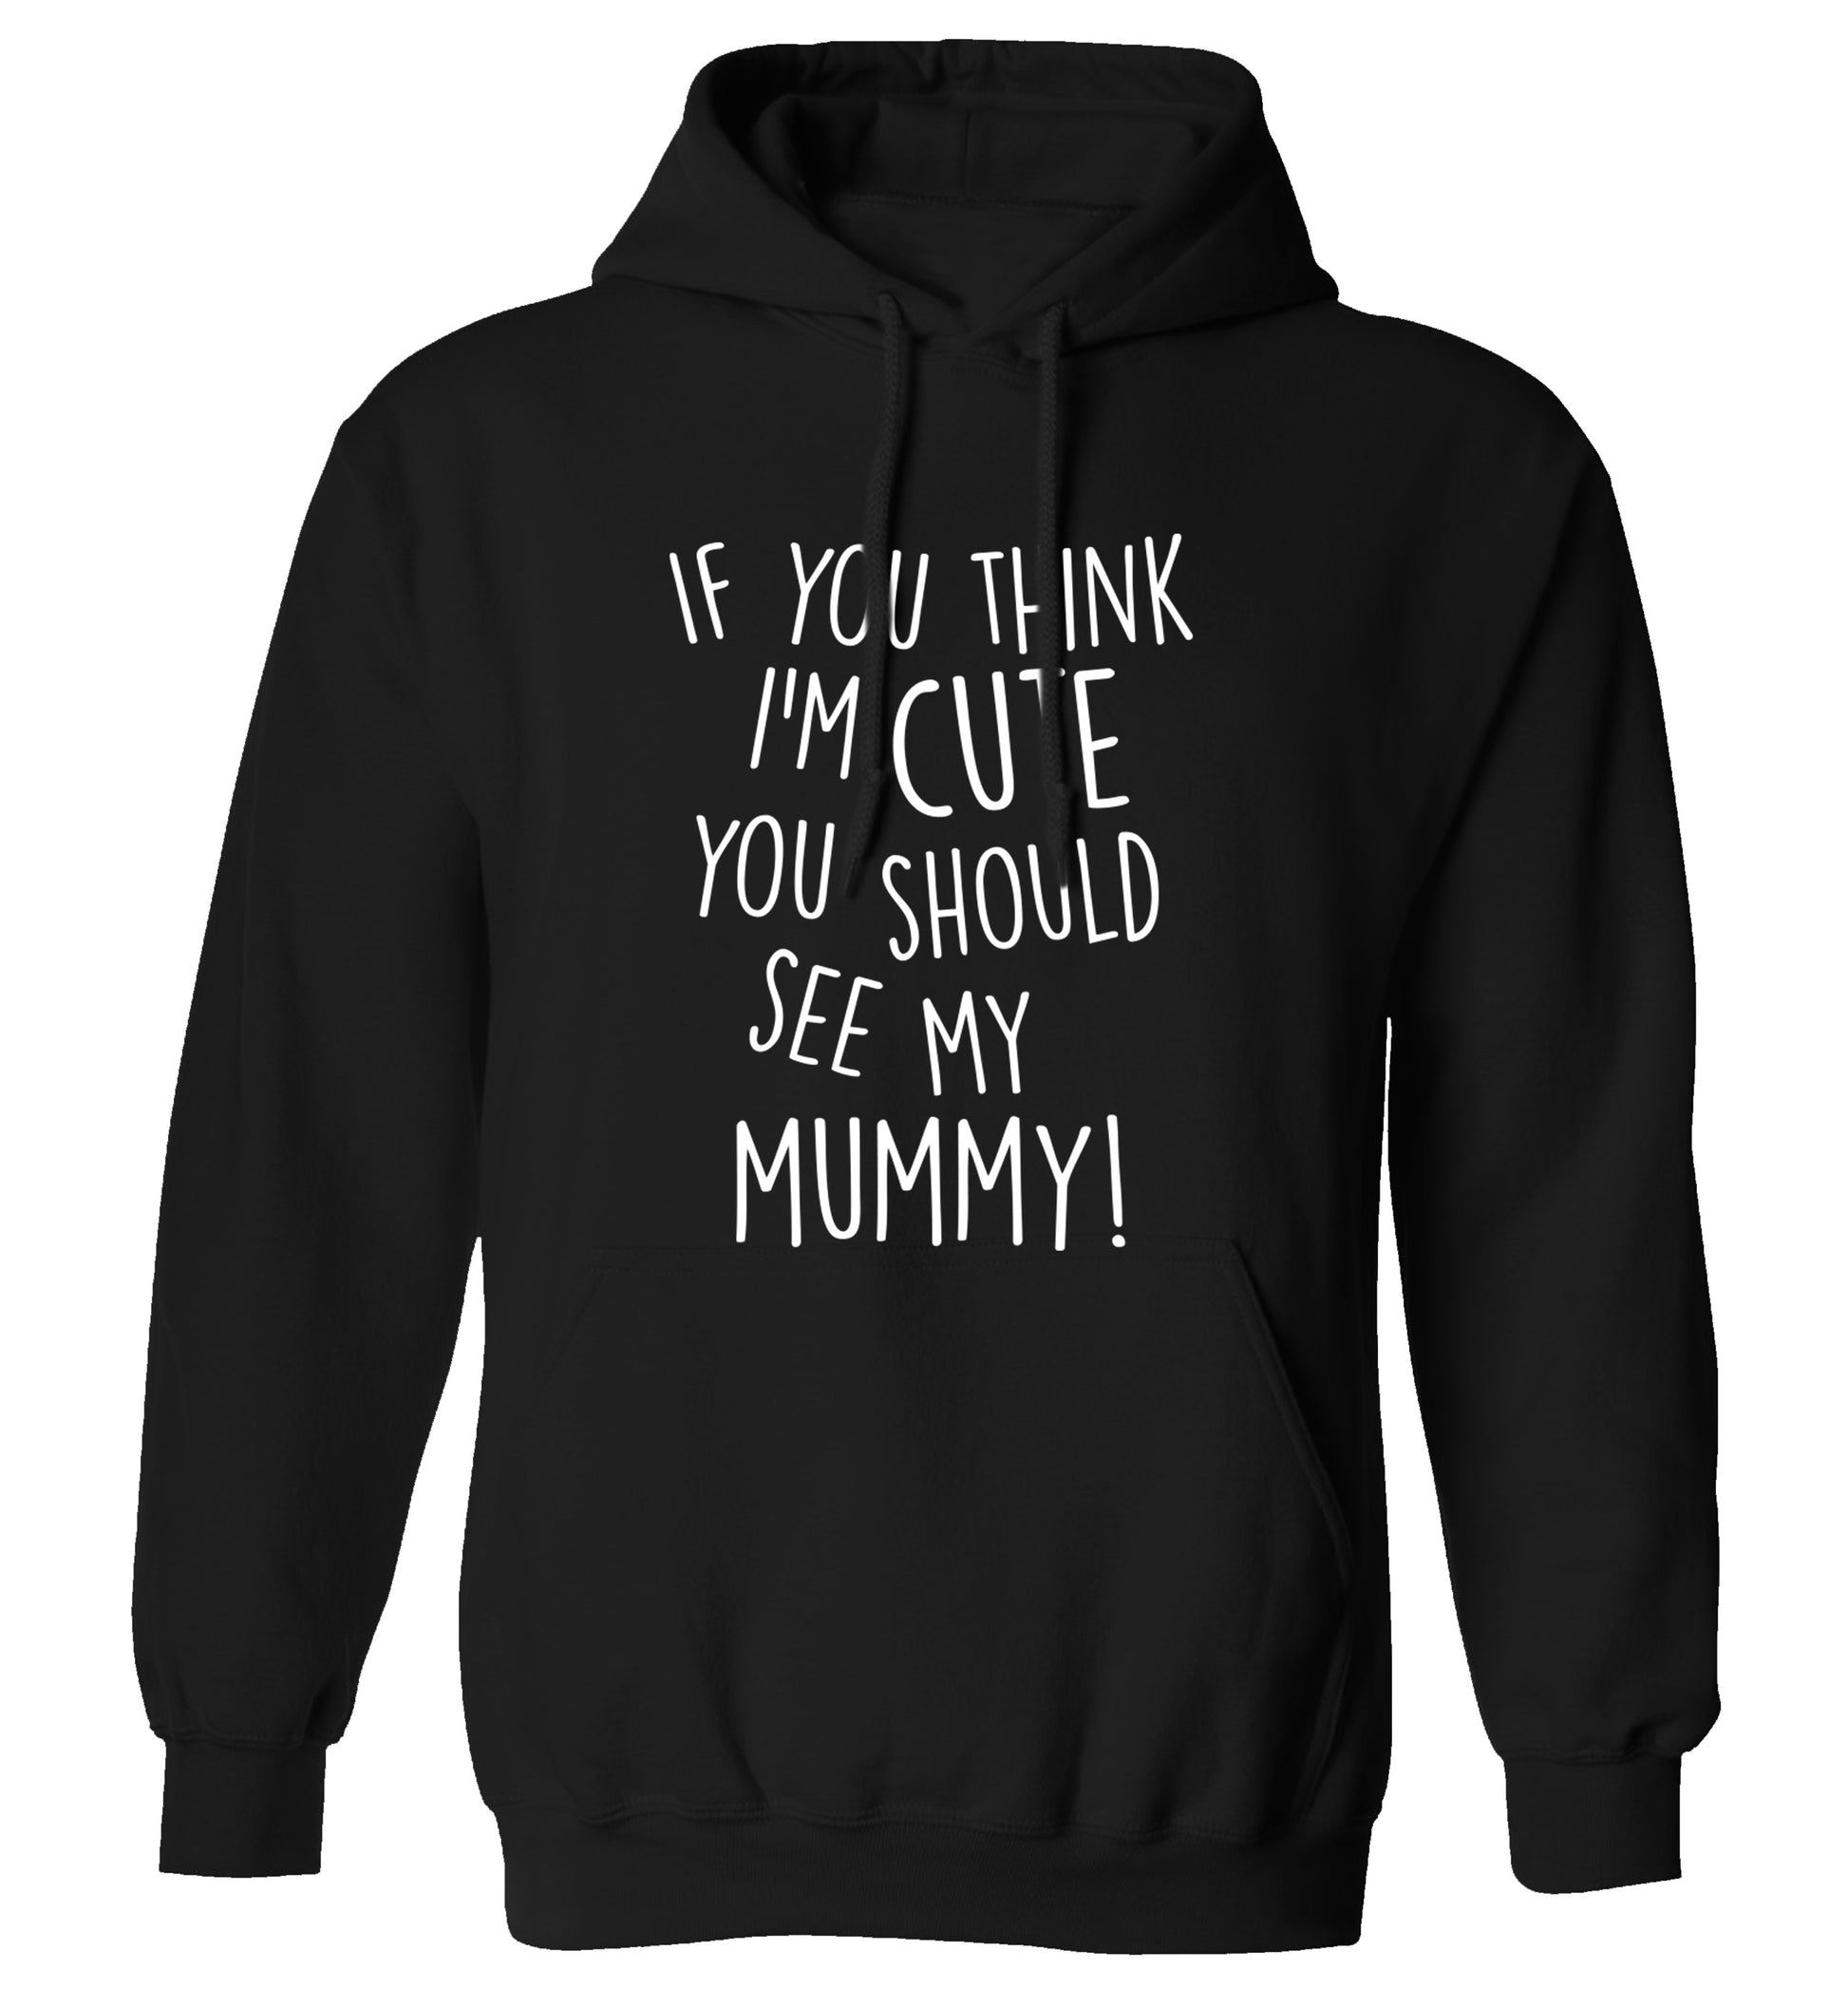 If you think I'm cute you should see my mummy adults unisex black hoodie 2XL